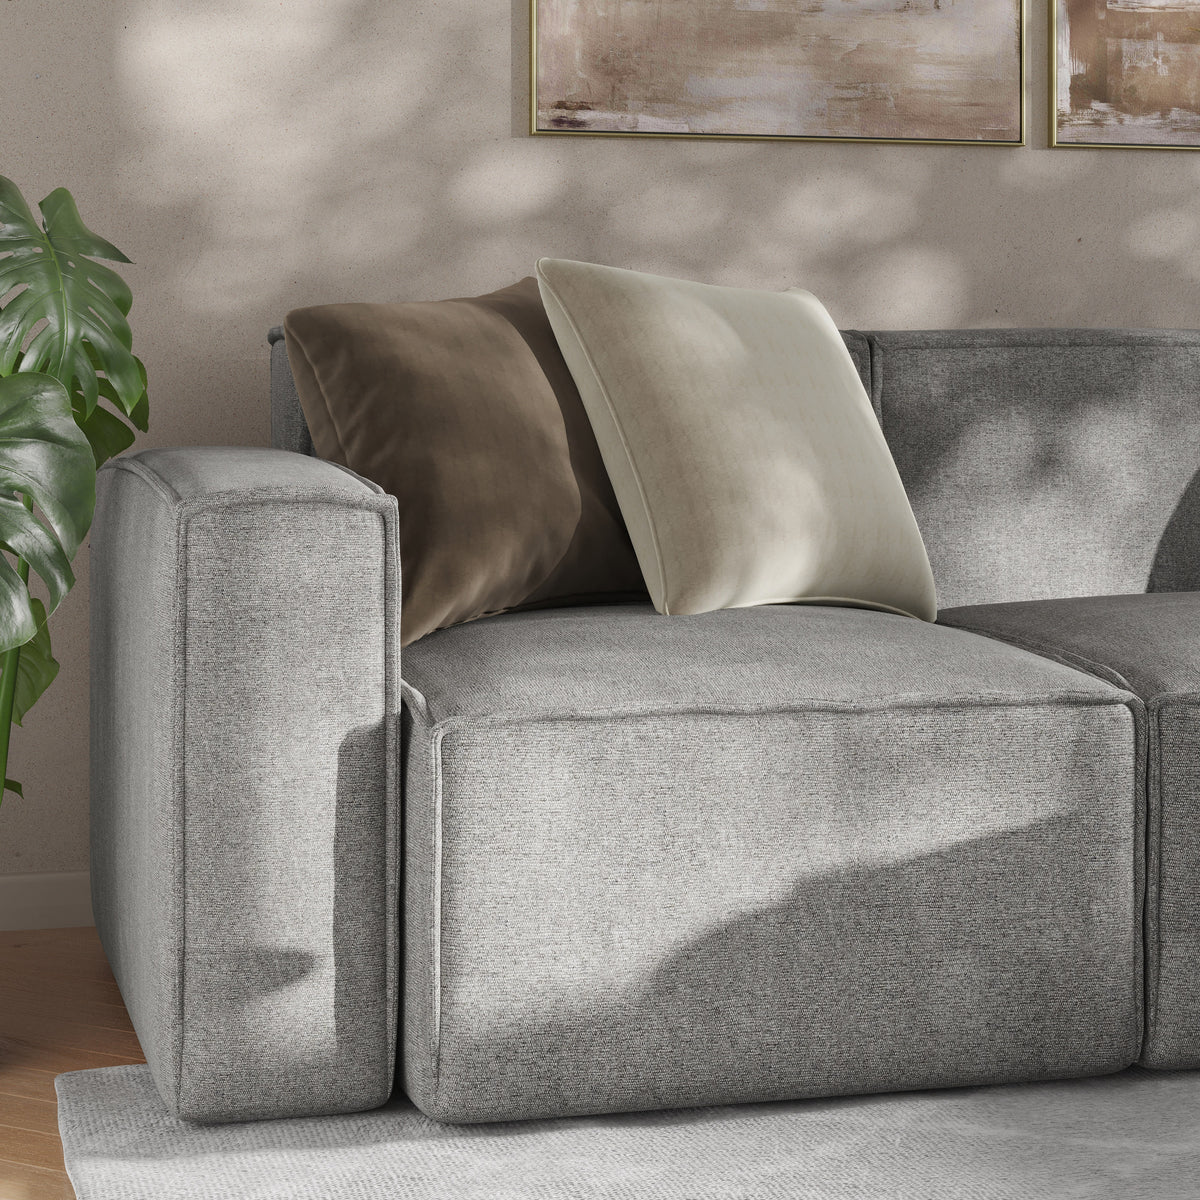 Gray |#| Contemporary Modular Sectional Sofa Left Side Chair with Armrest - Gray Fabric